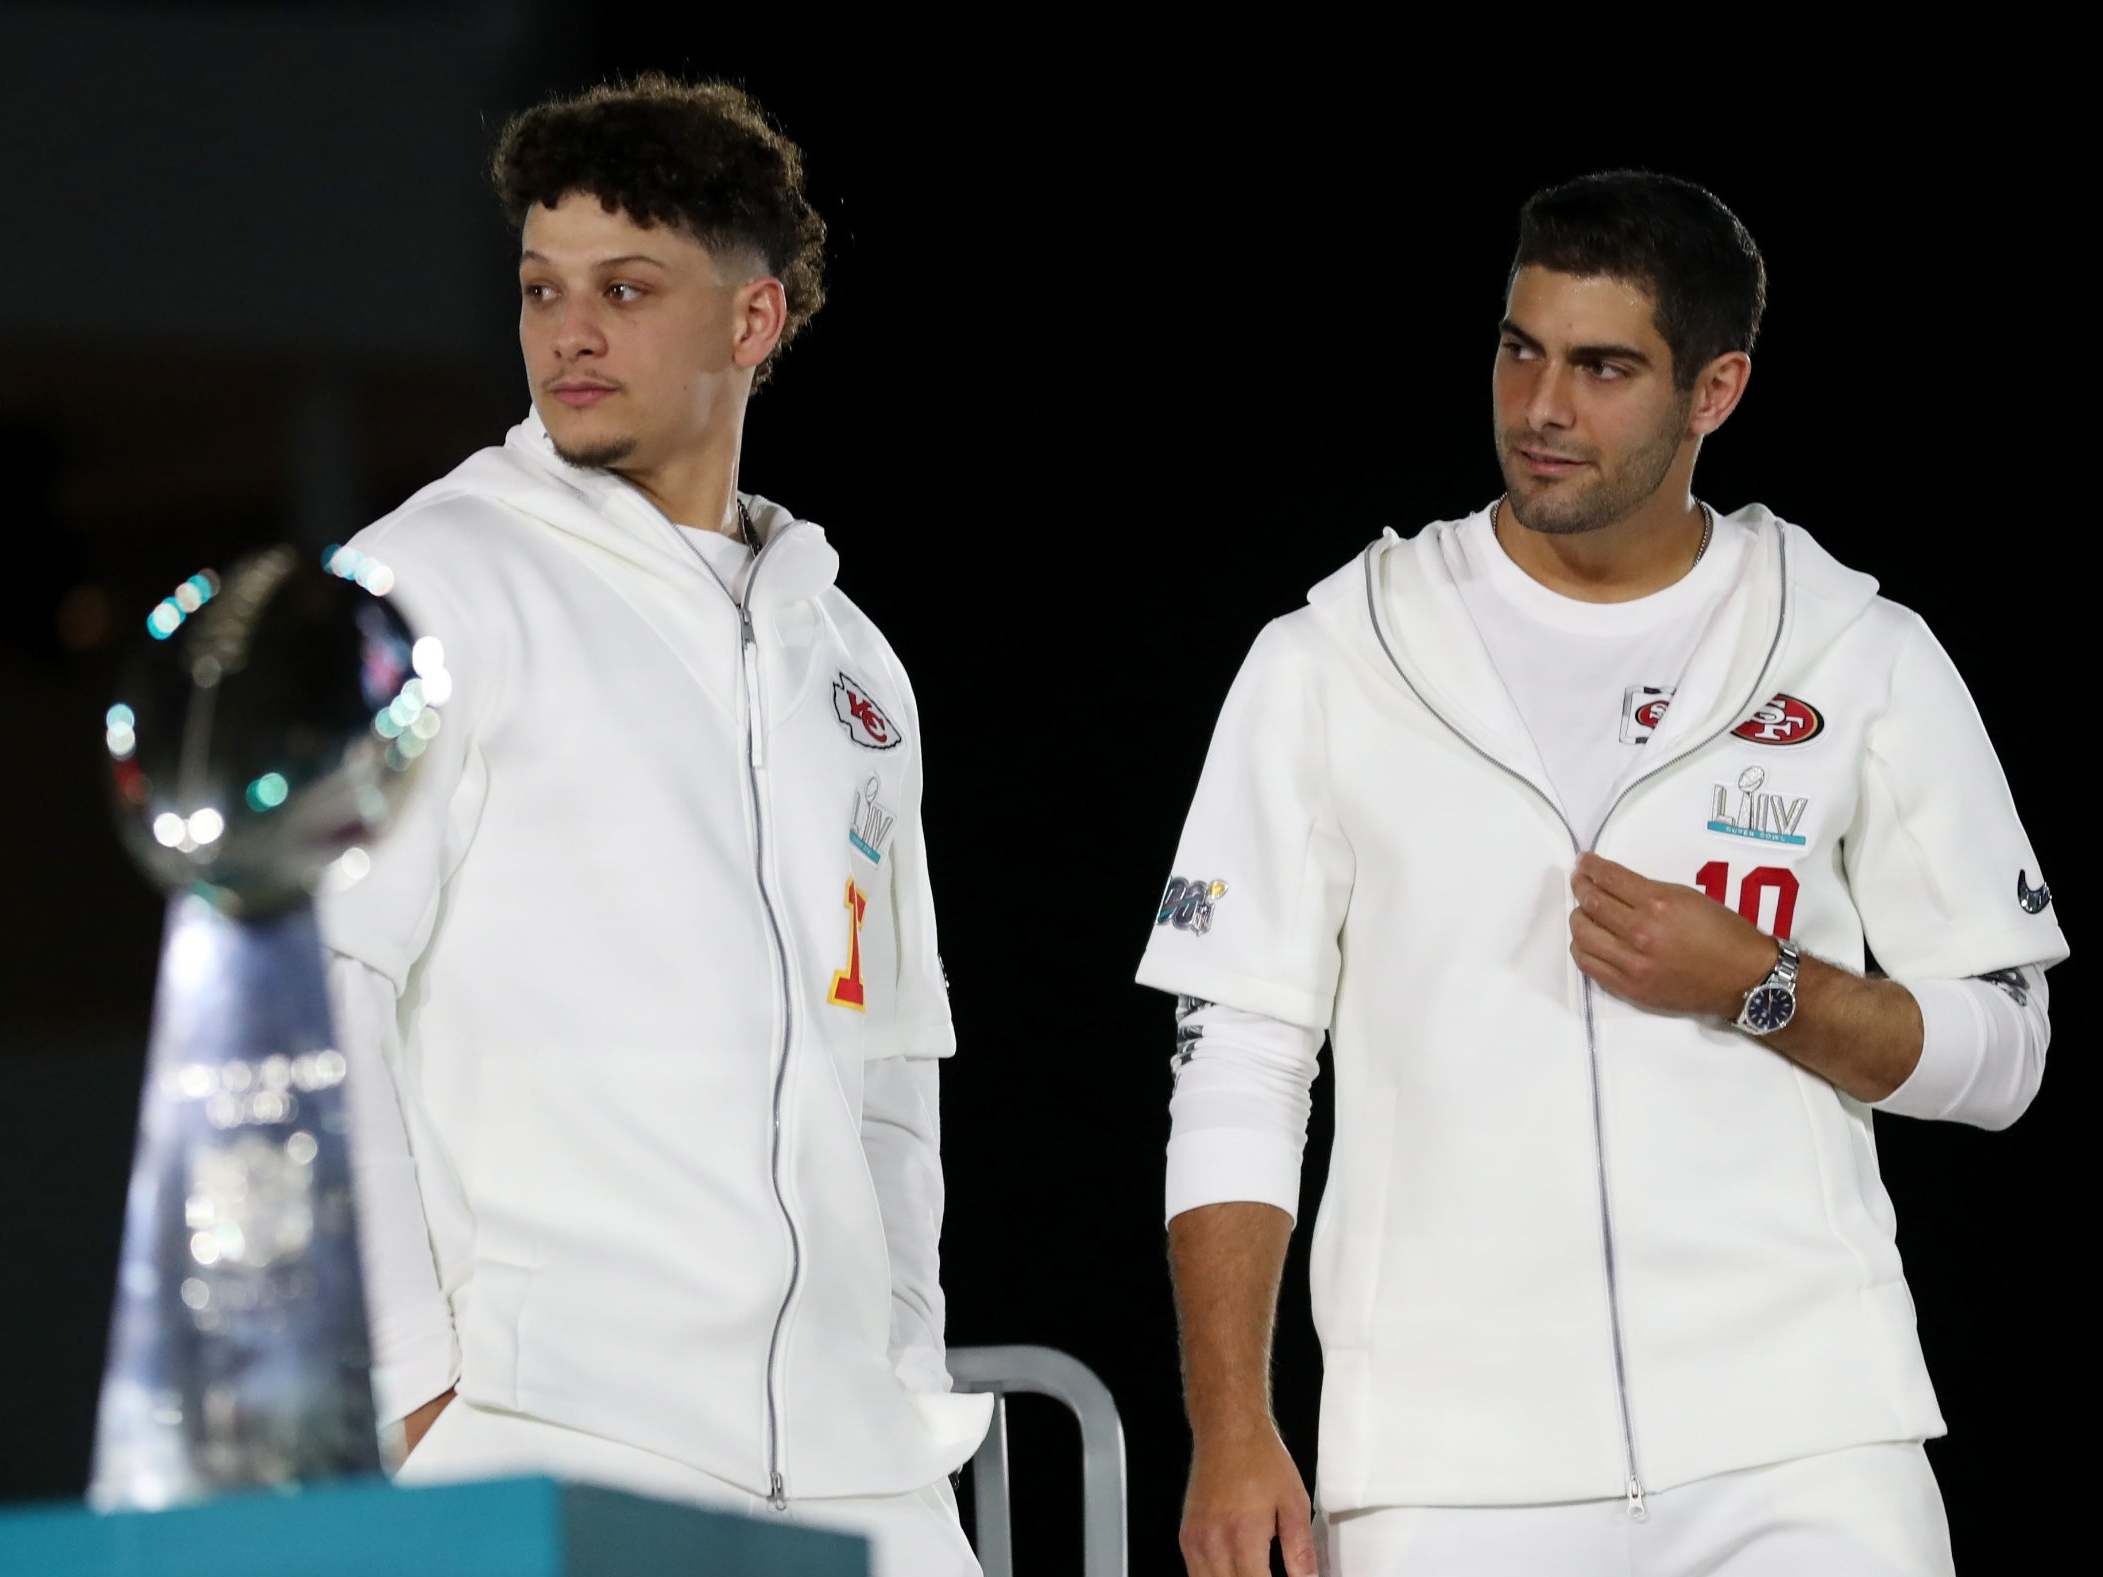 Patrick Mahomes and Jimmy Garoppolo during during Super Bowl LIV Opening Night